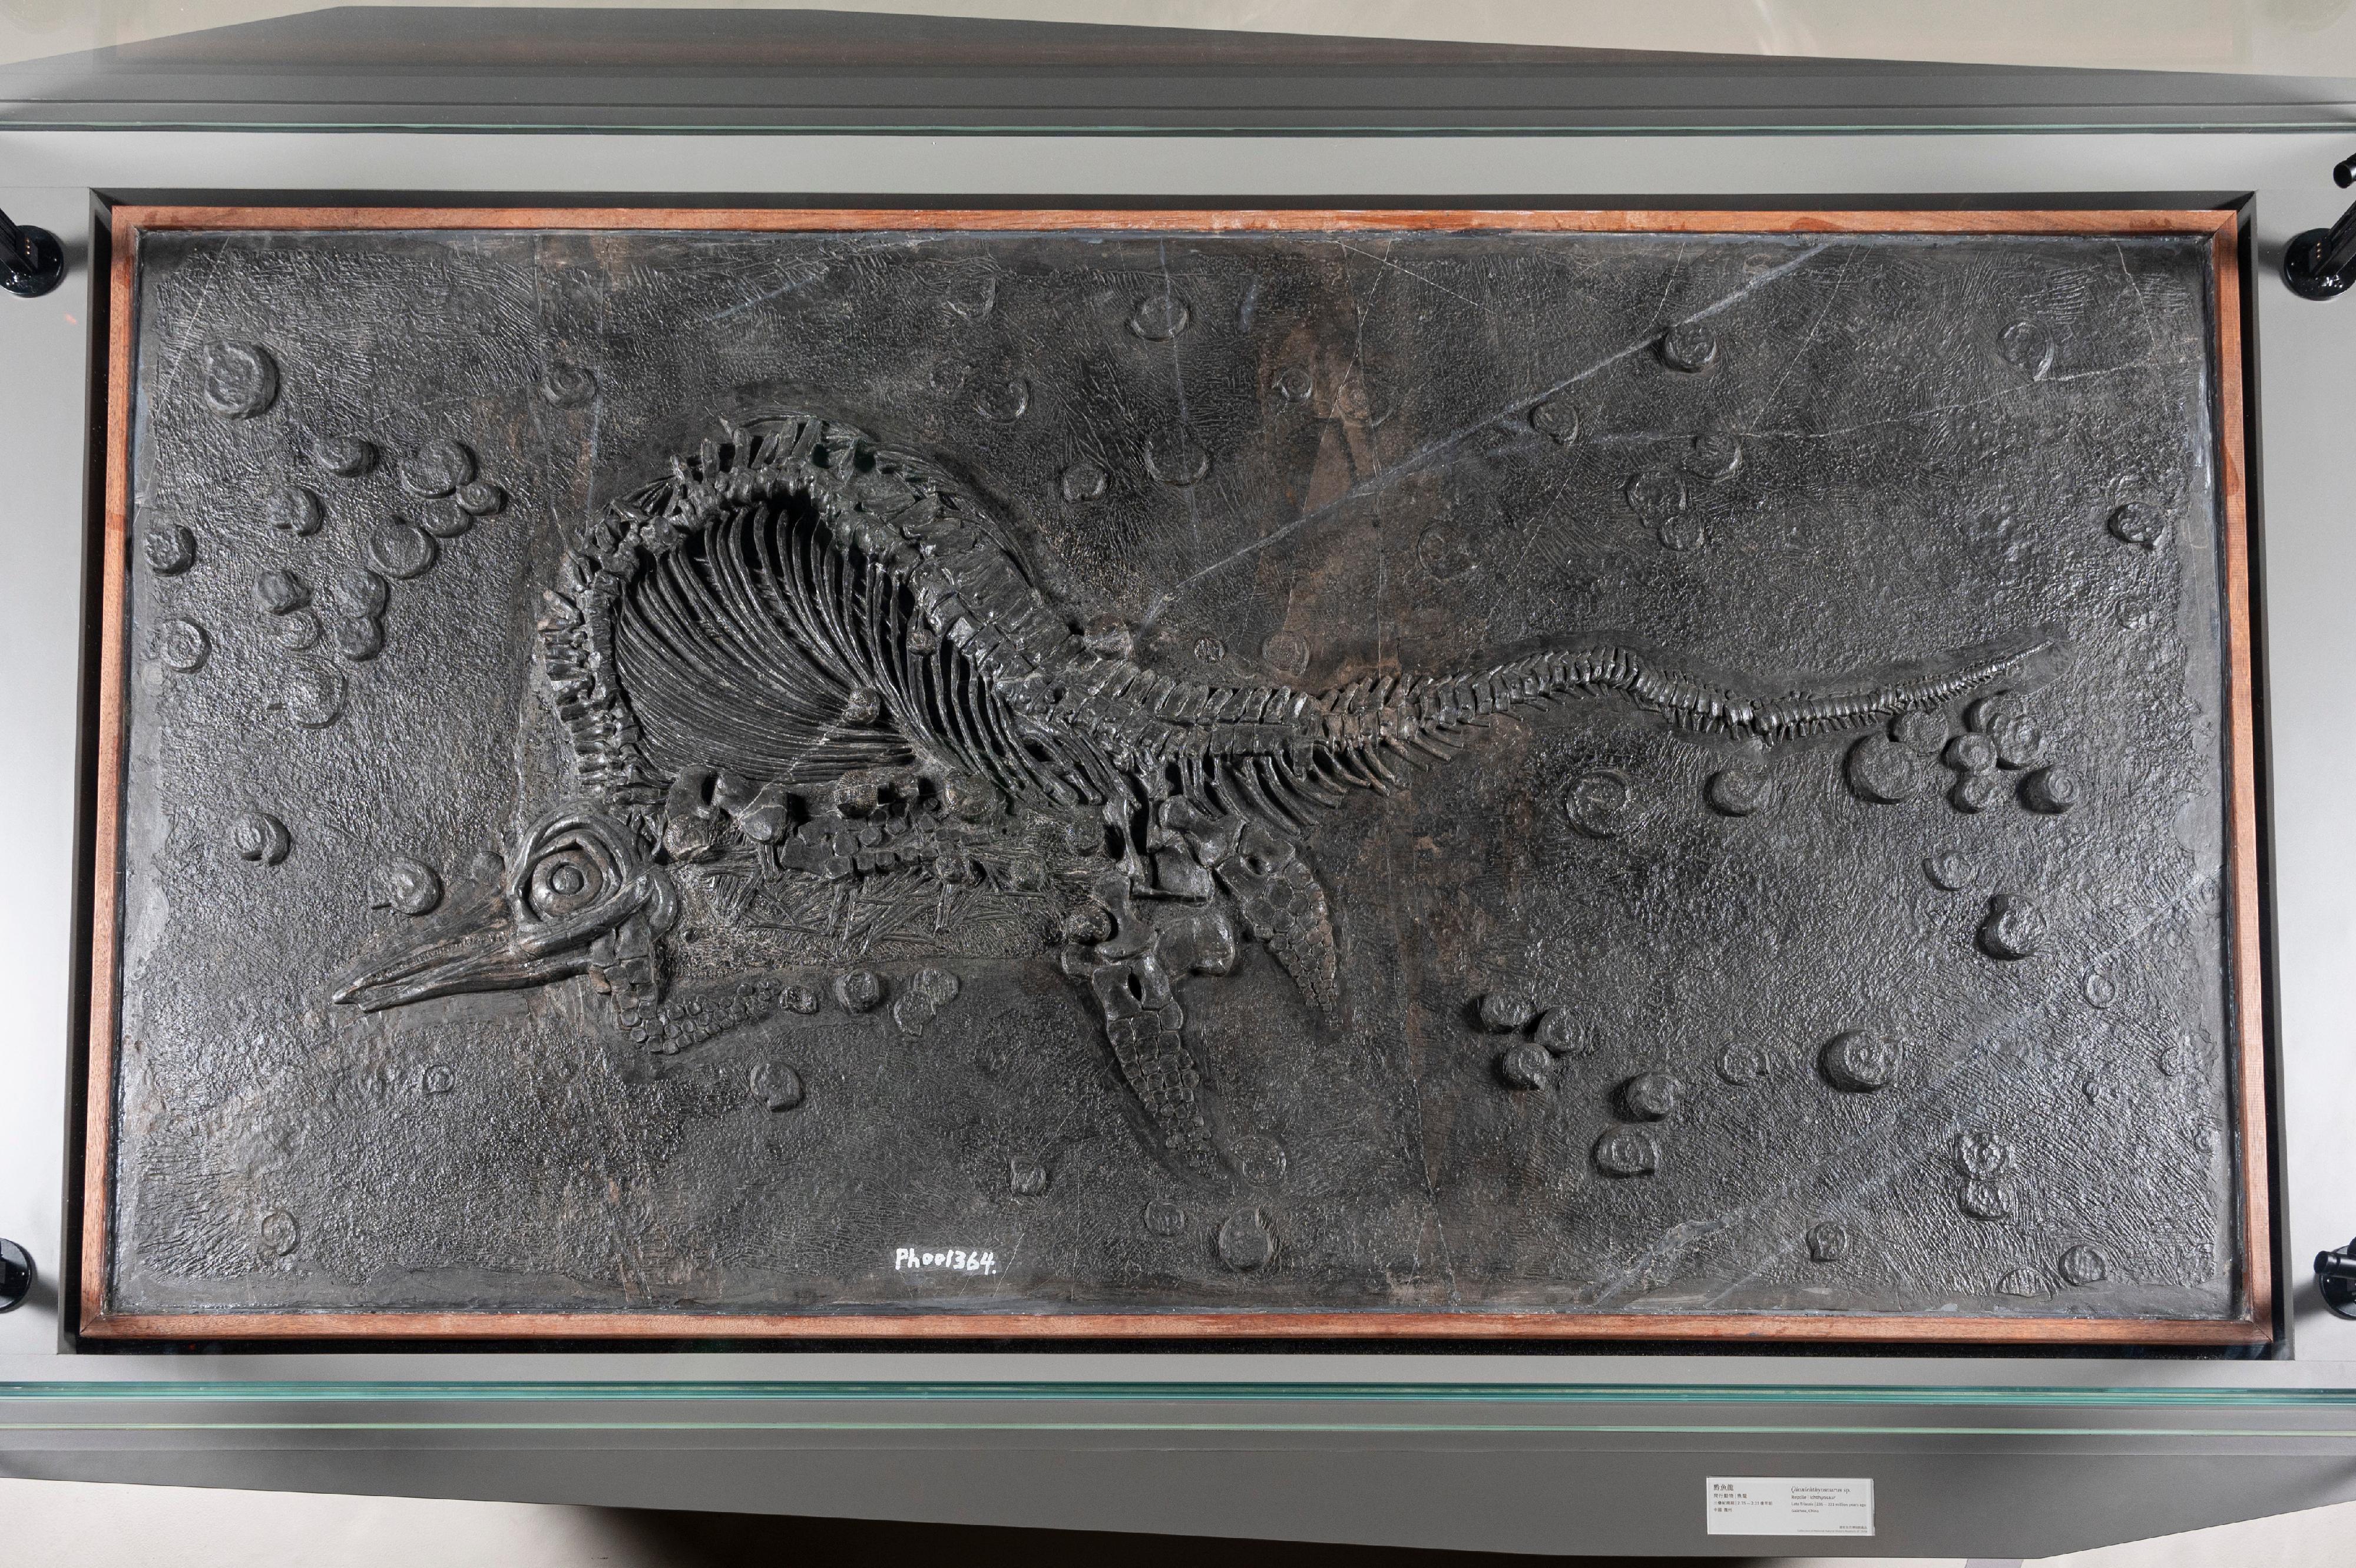 Part of the permanent exhibition "Extinction·Resilience" at the Palaeontology Gallery at the Hong Kong Science Museum will be temporarily closed from April 6 (Saturday) to the end of April for renewal of exhibits. Photo shows the fossil of Qianichthyosaurus, a group of unique ichthyosaur species found in China, which will be returned to the National Natural History Museum of China.